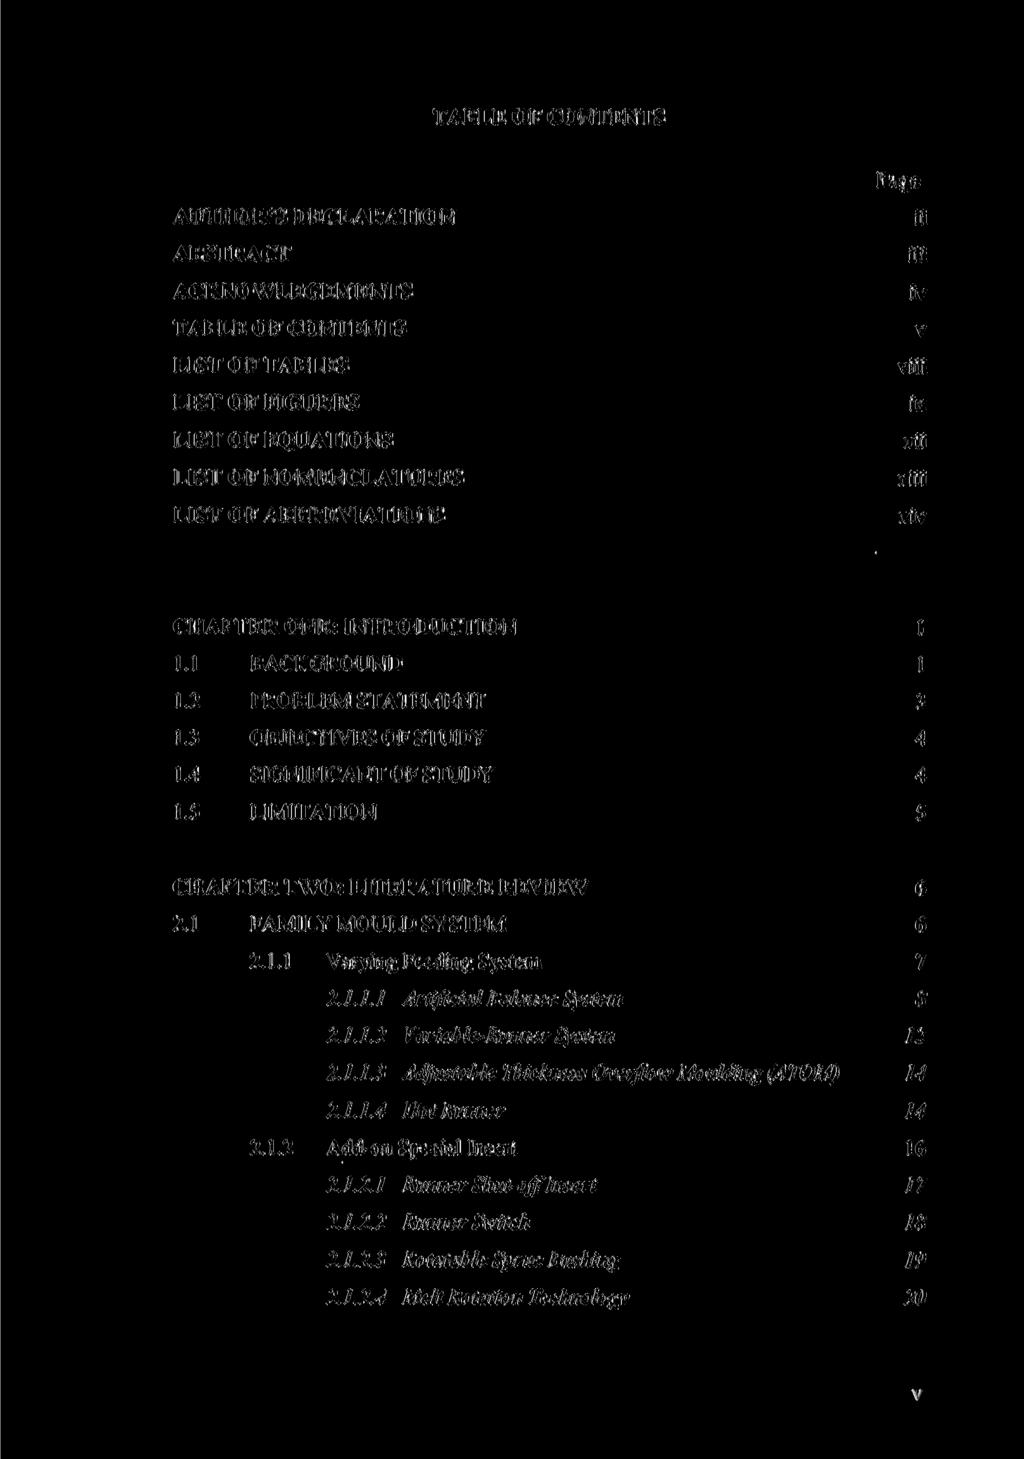 TABLE OF CONTENTS AUTHOR S DECLARATION ABSTRACT ACKNOWLEGEMENTS TABLE OF CONTENTS LIST OF TABLES LIST OF FIGURES LIST OF EQUATIONS LIST OF NOMENCLATURES LIST OF ABBREVIATIONS Page ii iii